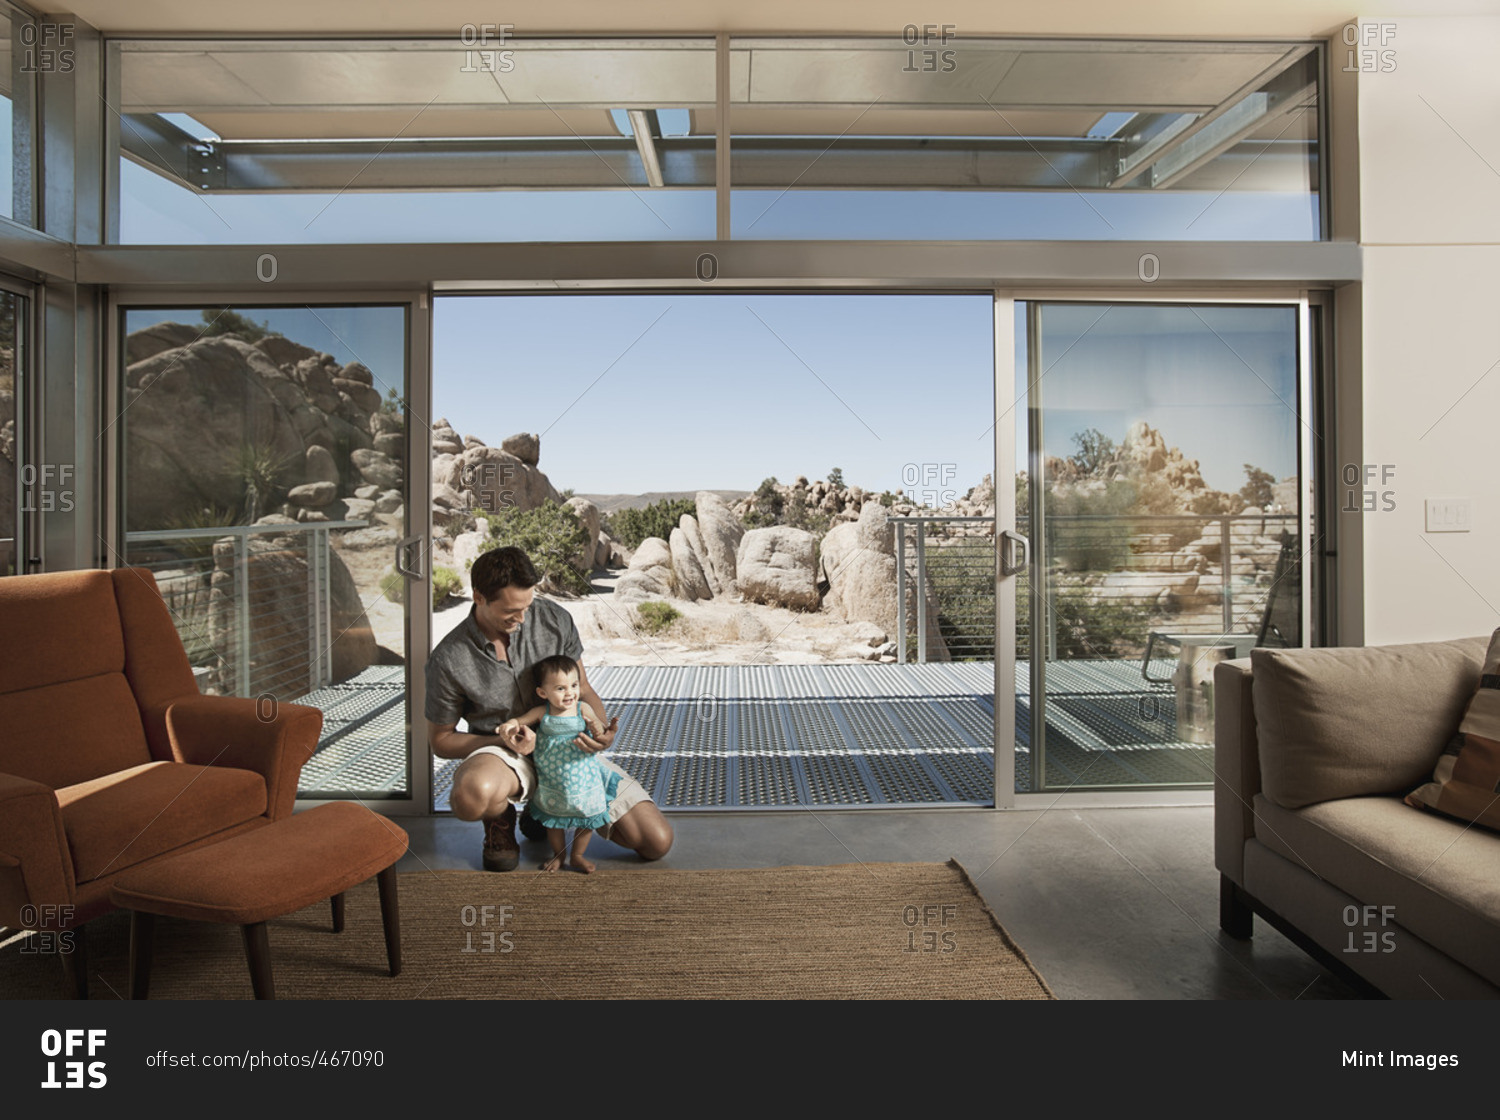 A man and a young child in an ecohouse, a home with large glass walls and view out over the rocky landscape